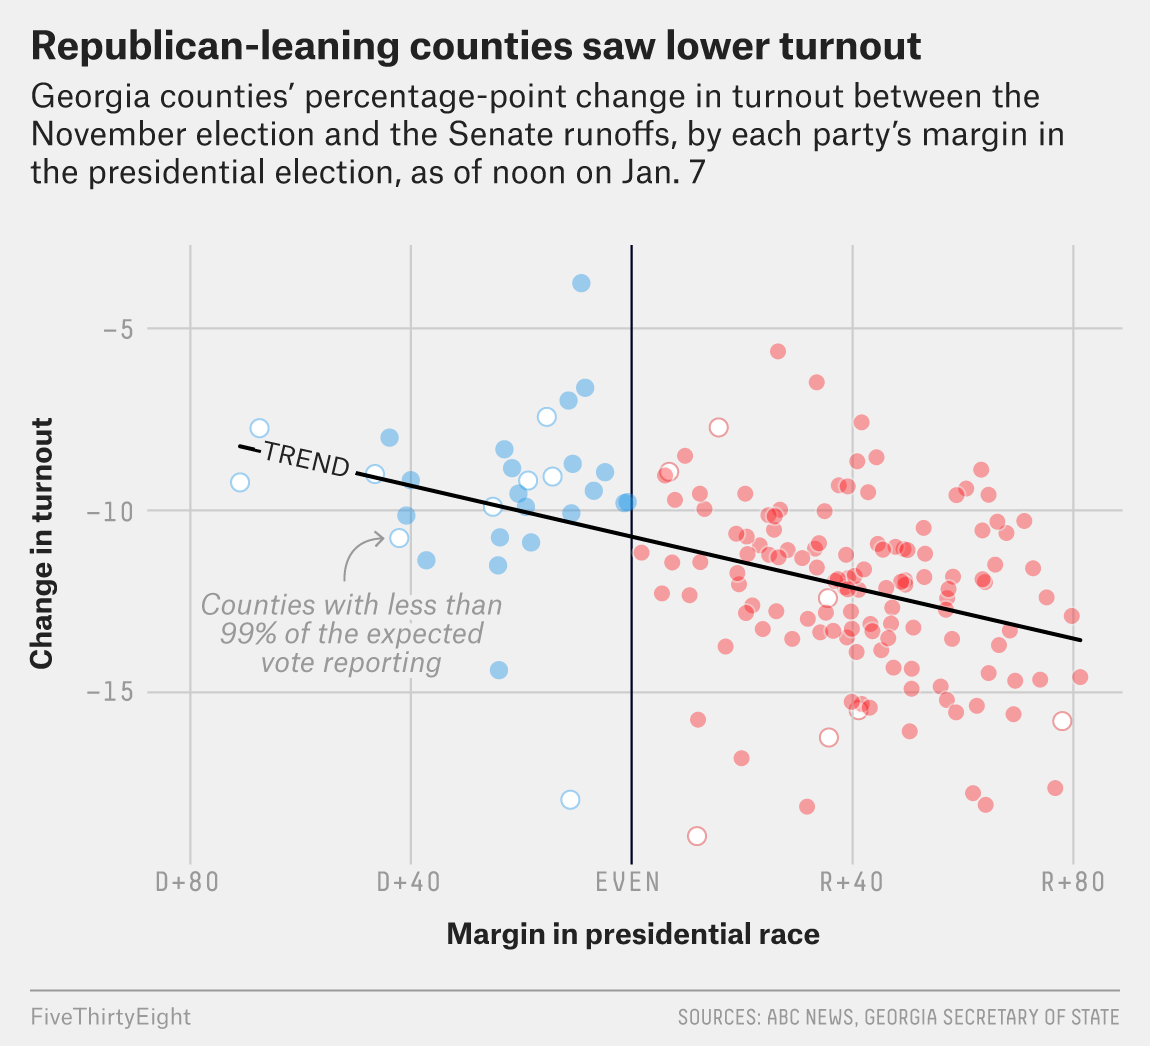 A scatter plot titled 'Republican-leaning counties saw lower turnout', with margin in presidential race on the x axis and change in turnout in states on the y axis